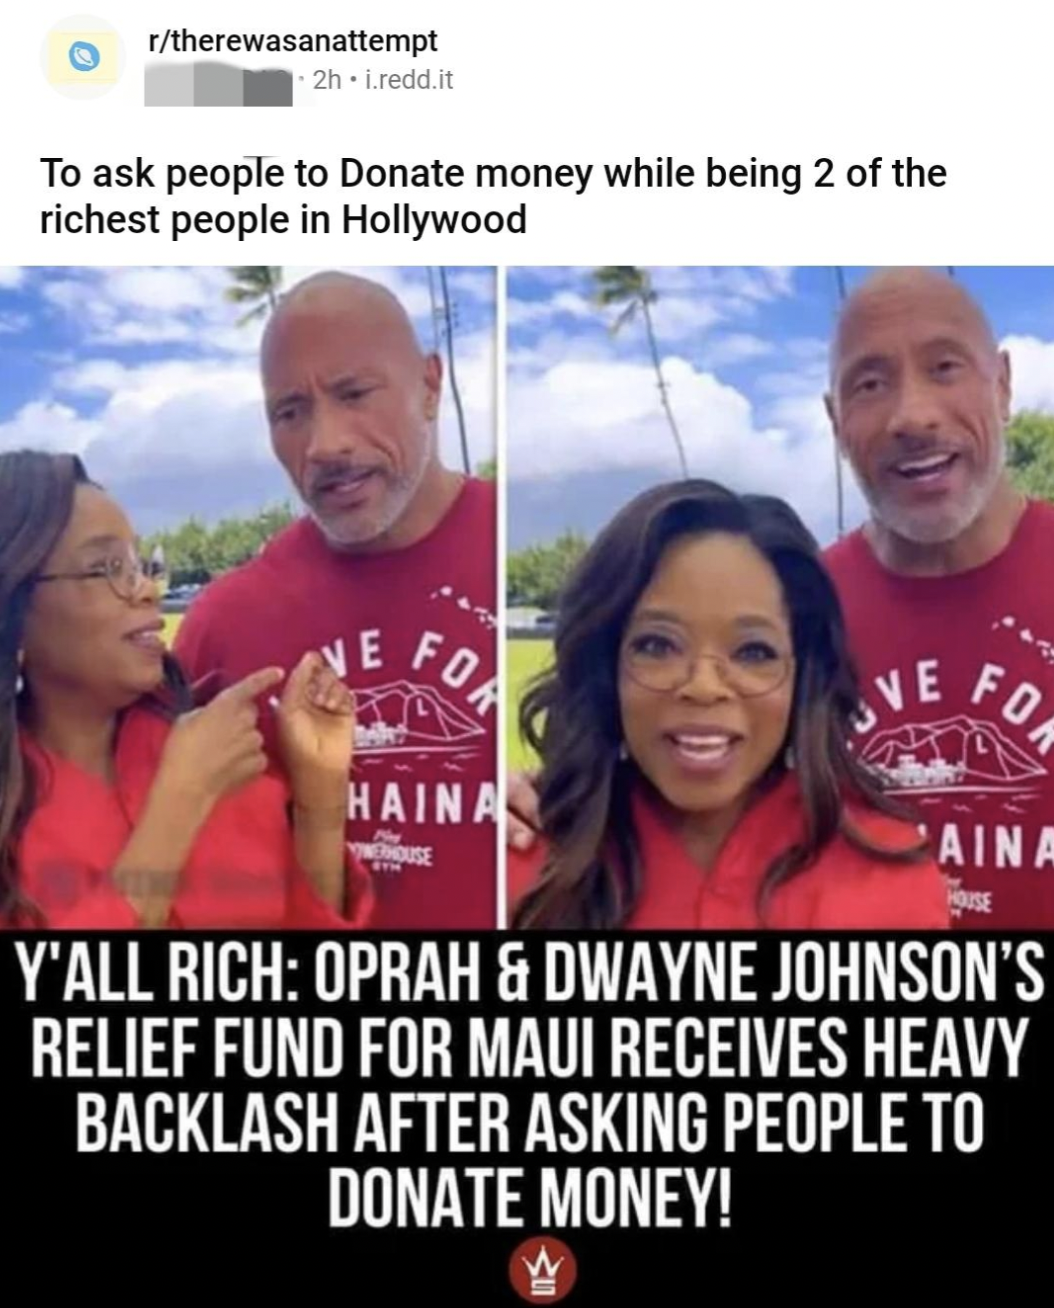 oprah and the rock asking for money - rtherewasanattempt 2h. Lredd.it To ask people to Donate money while being 2 of the richest people in Hollywood E Fo Haina Ve For Aina Y'All Rich Oprah & Dwayne Johnson'S Relief Fund For Maui Receives Heavy Backlash Af